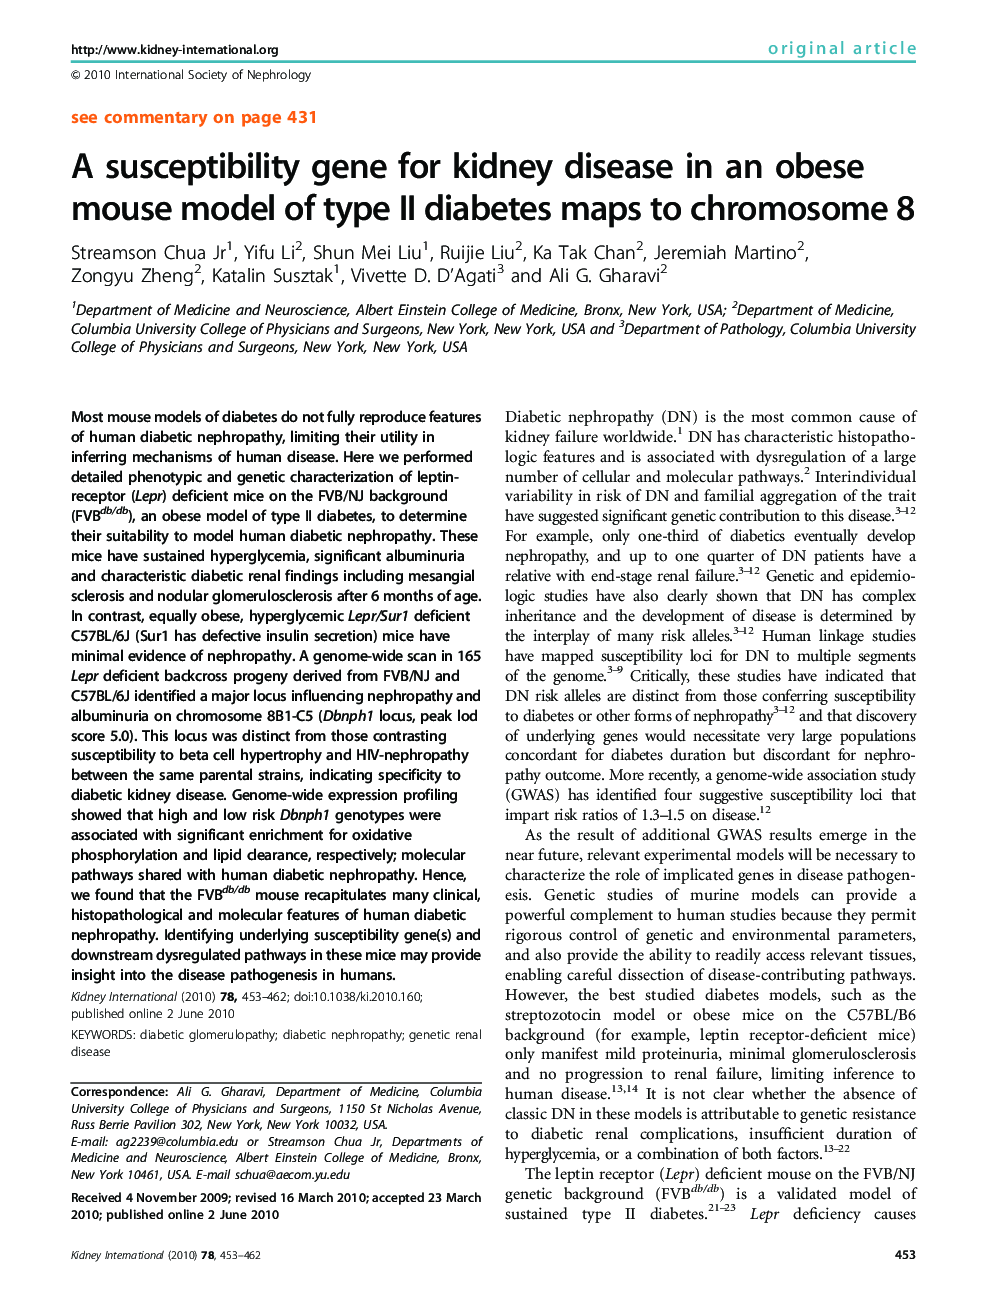 A susceptibility gene for kidney disease in an obese mouse model of type II diabetes maps to chromosome 8 